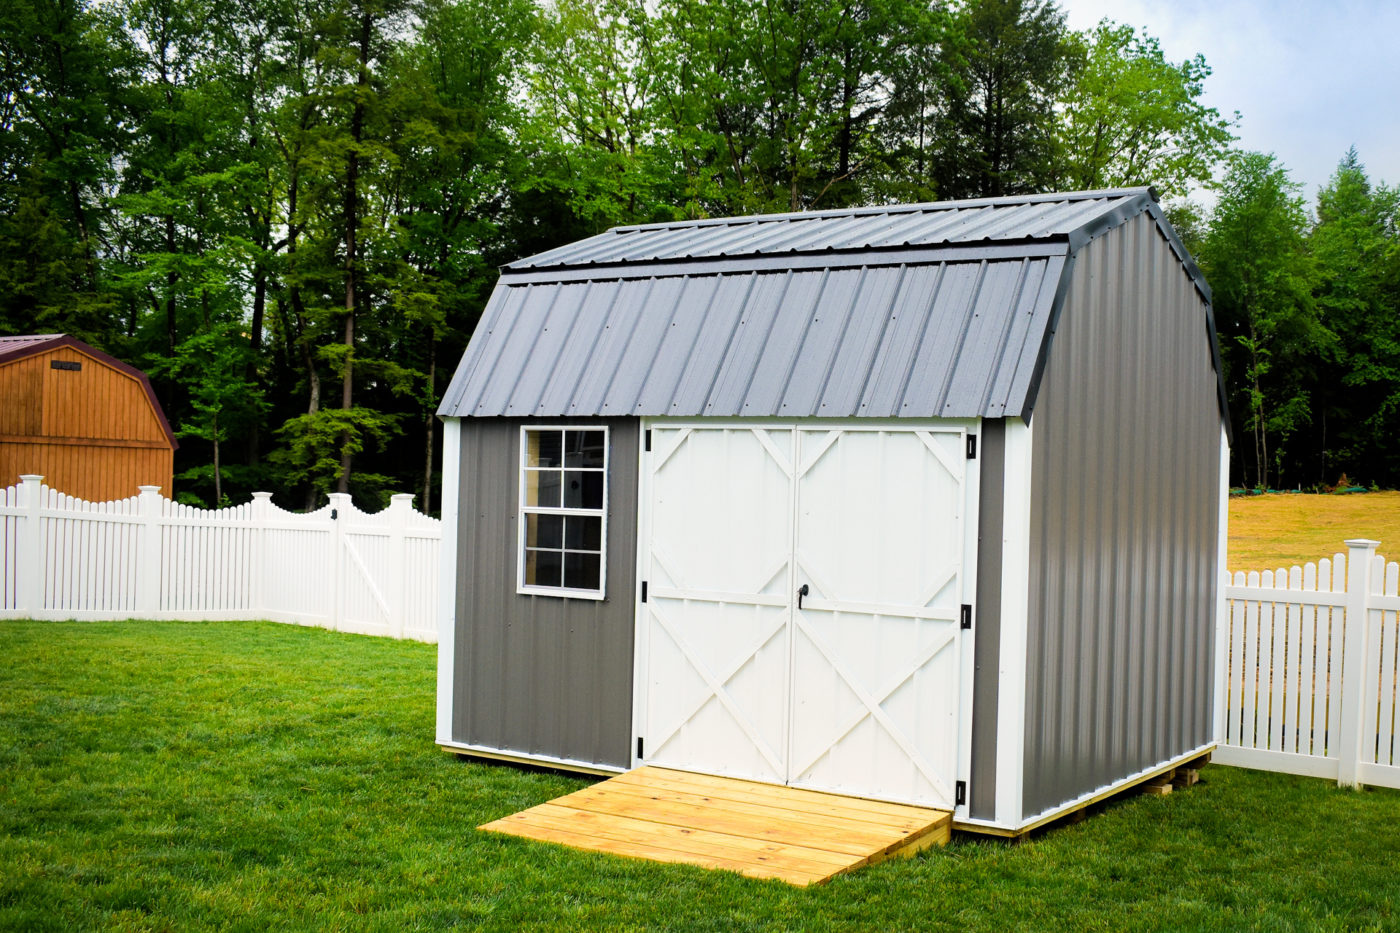 Storage Sheds For Sale in Meadville, PA